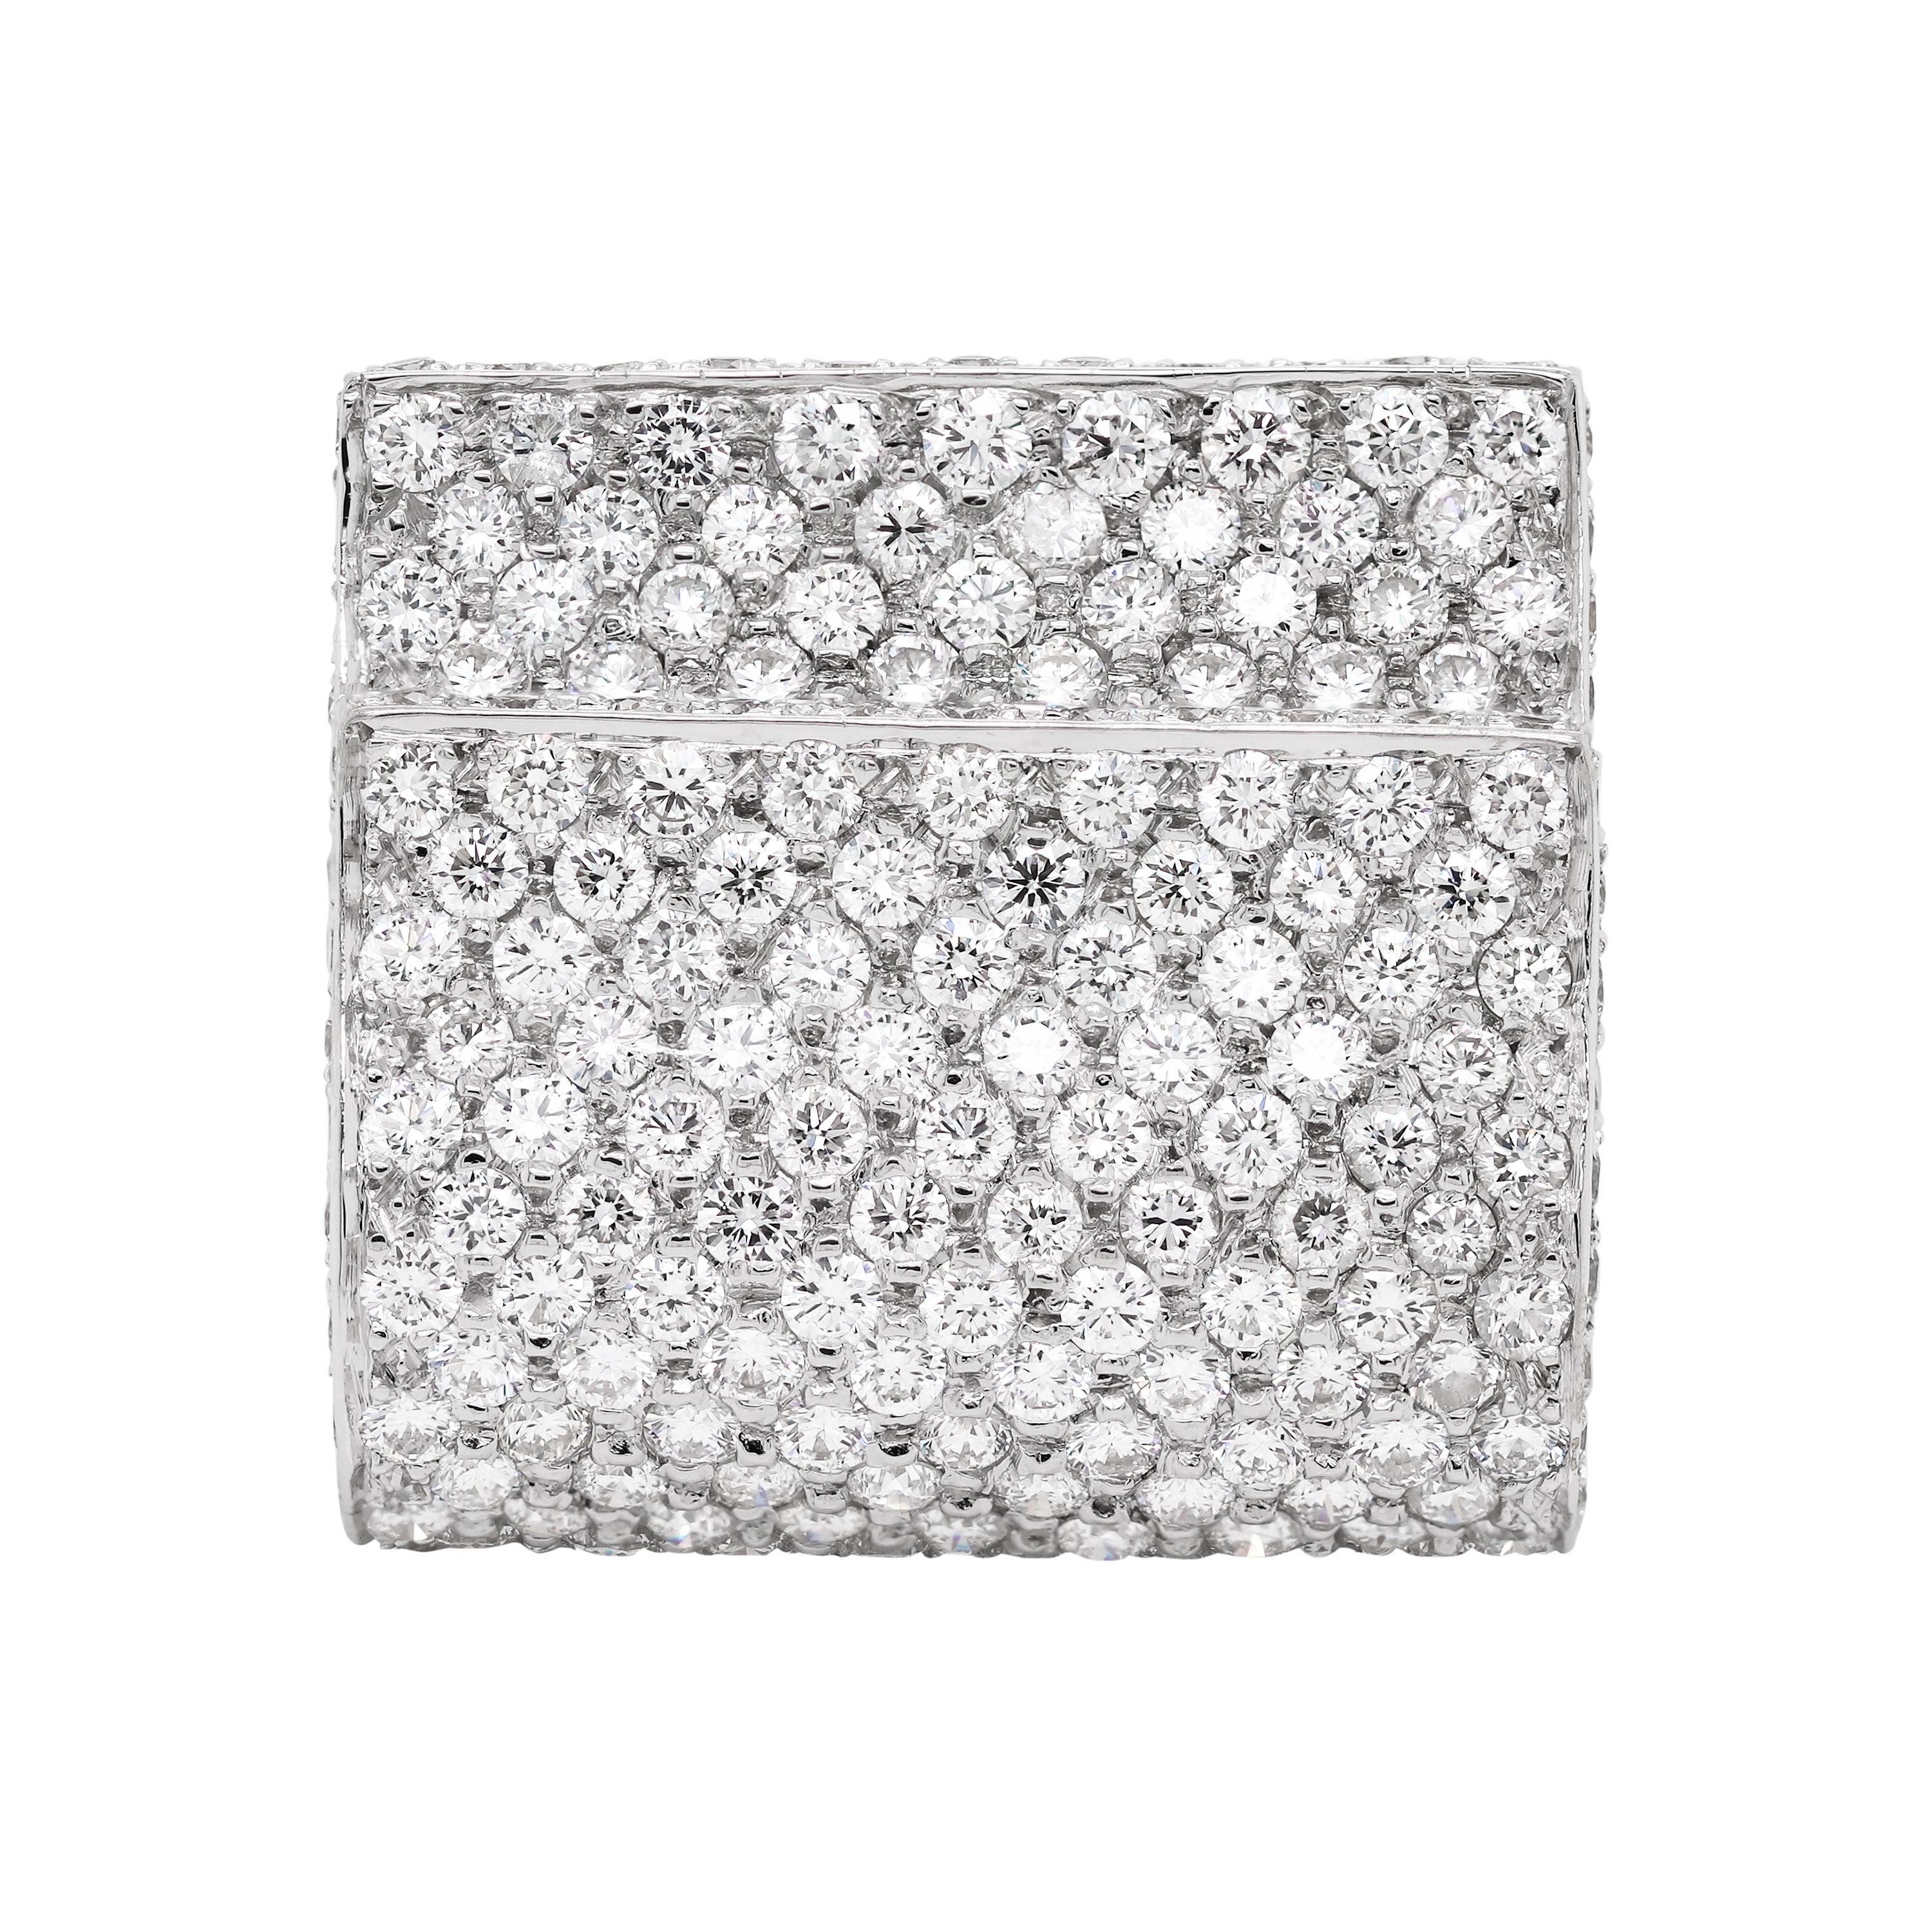 Unique cocktail ring featuring 231 round brilliant cut diamonds, all pavé set in open back settings, totalling to an approximate weight of 3.50ct. What makes this ring unique are the two overlapping layers of white gold meticulously inlaid with